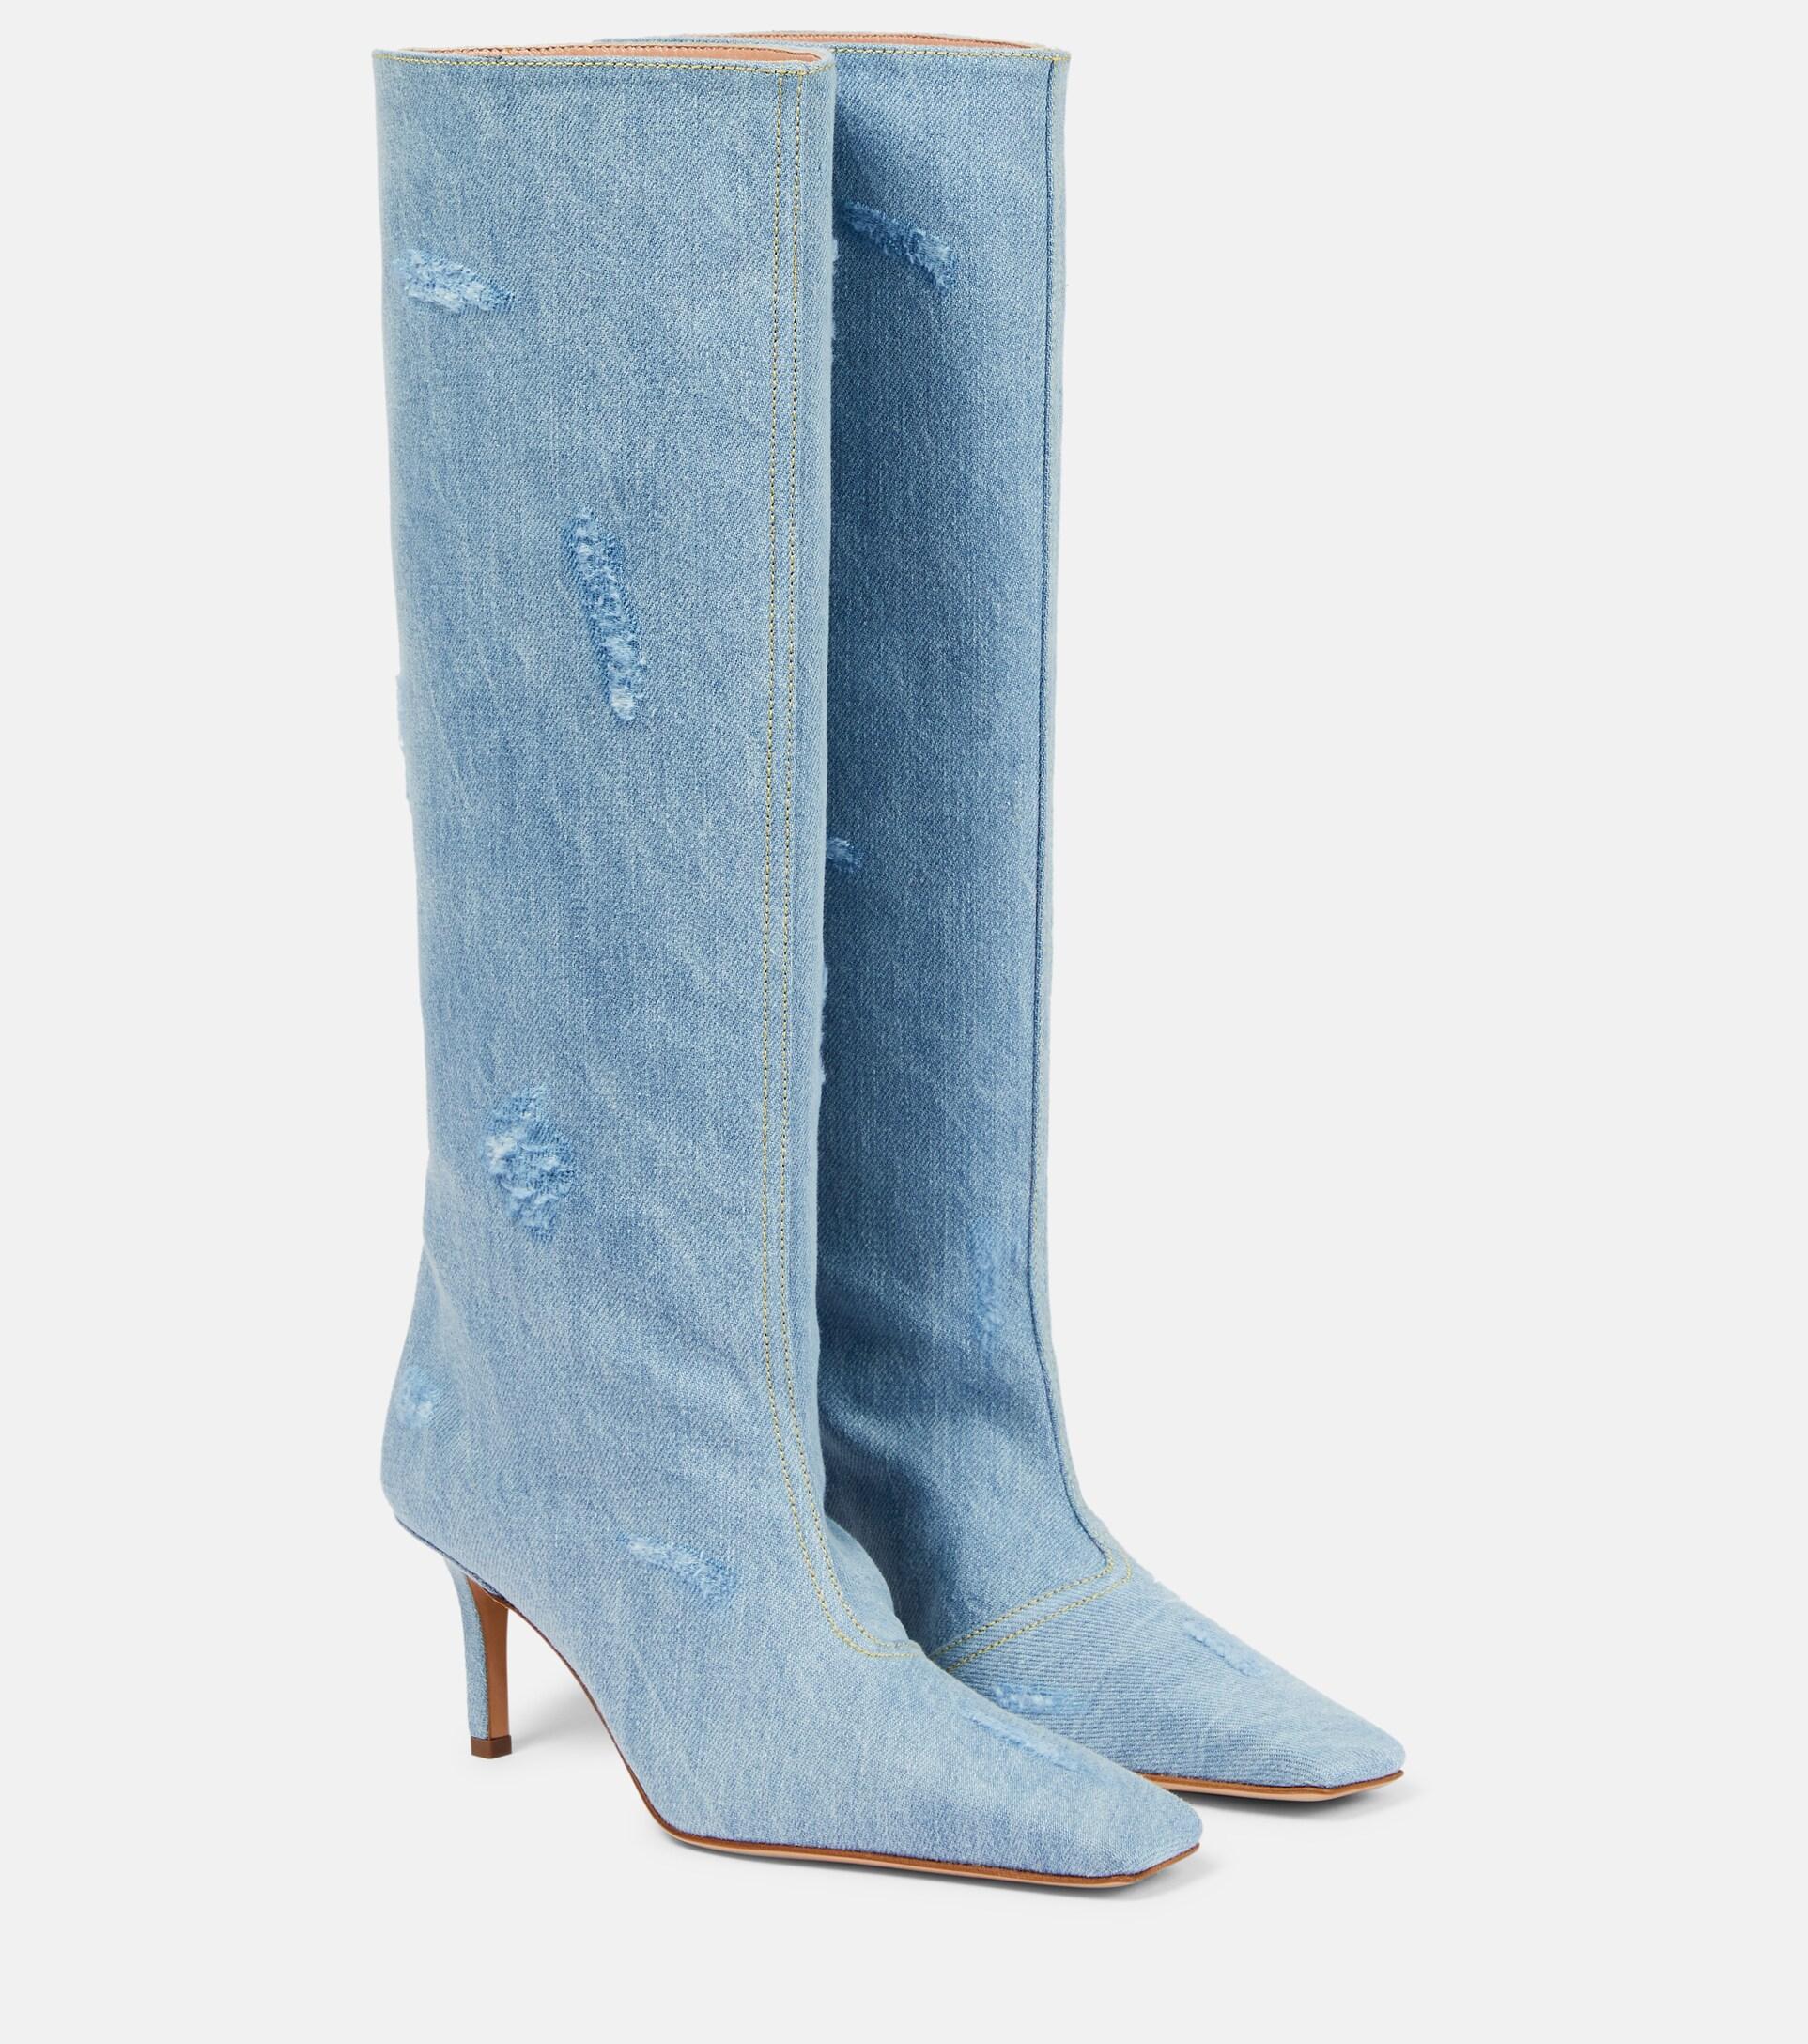 Acne Studios Distressed Denim Knee-high Boots in Blue | Lyst